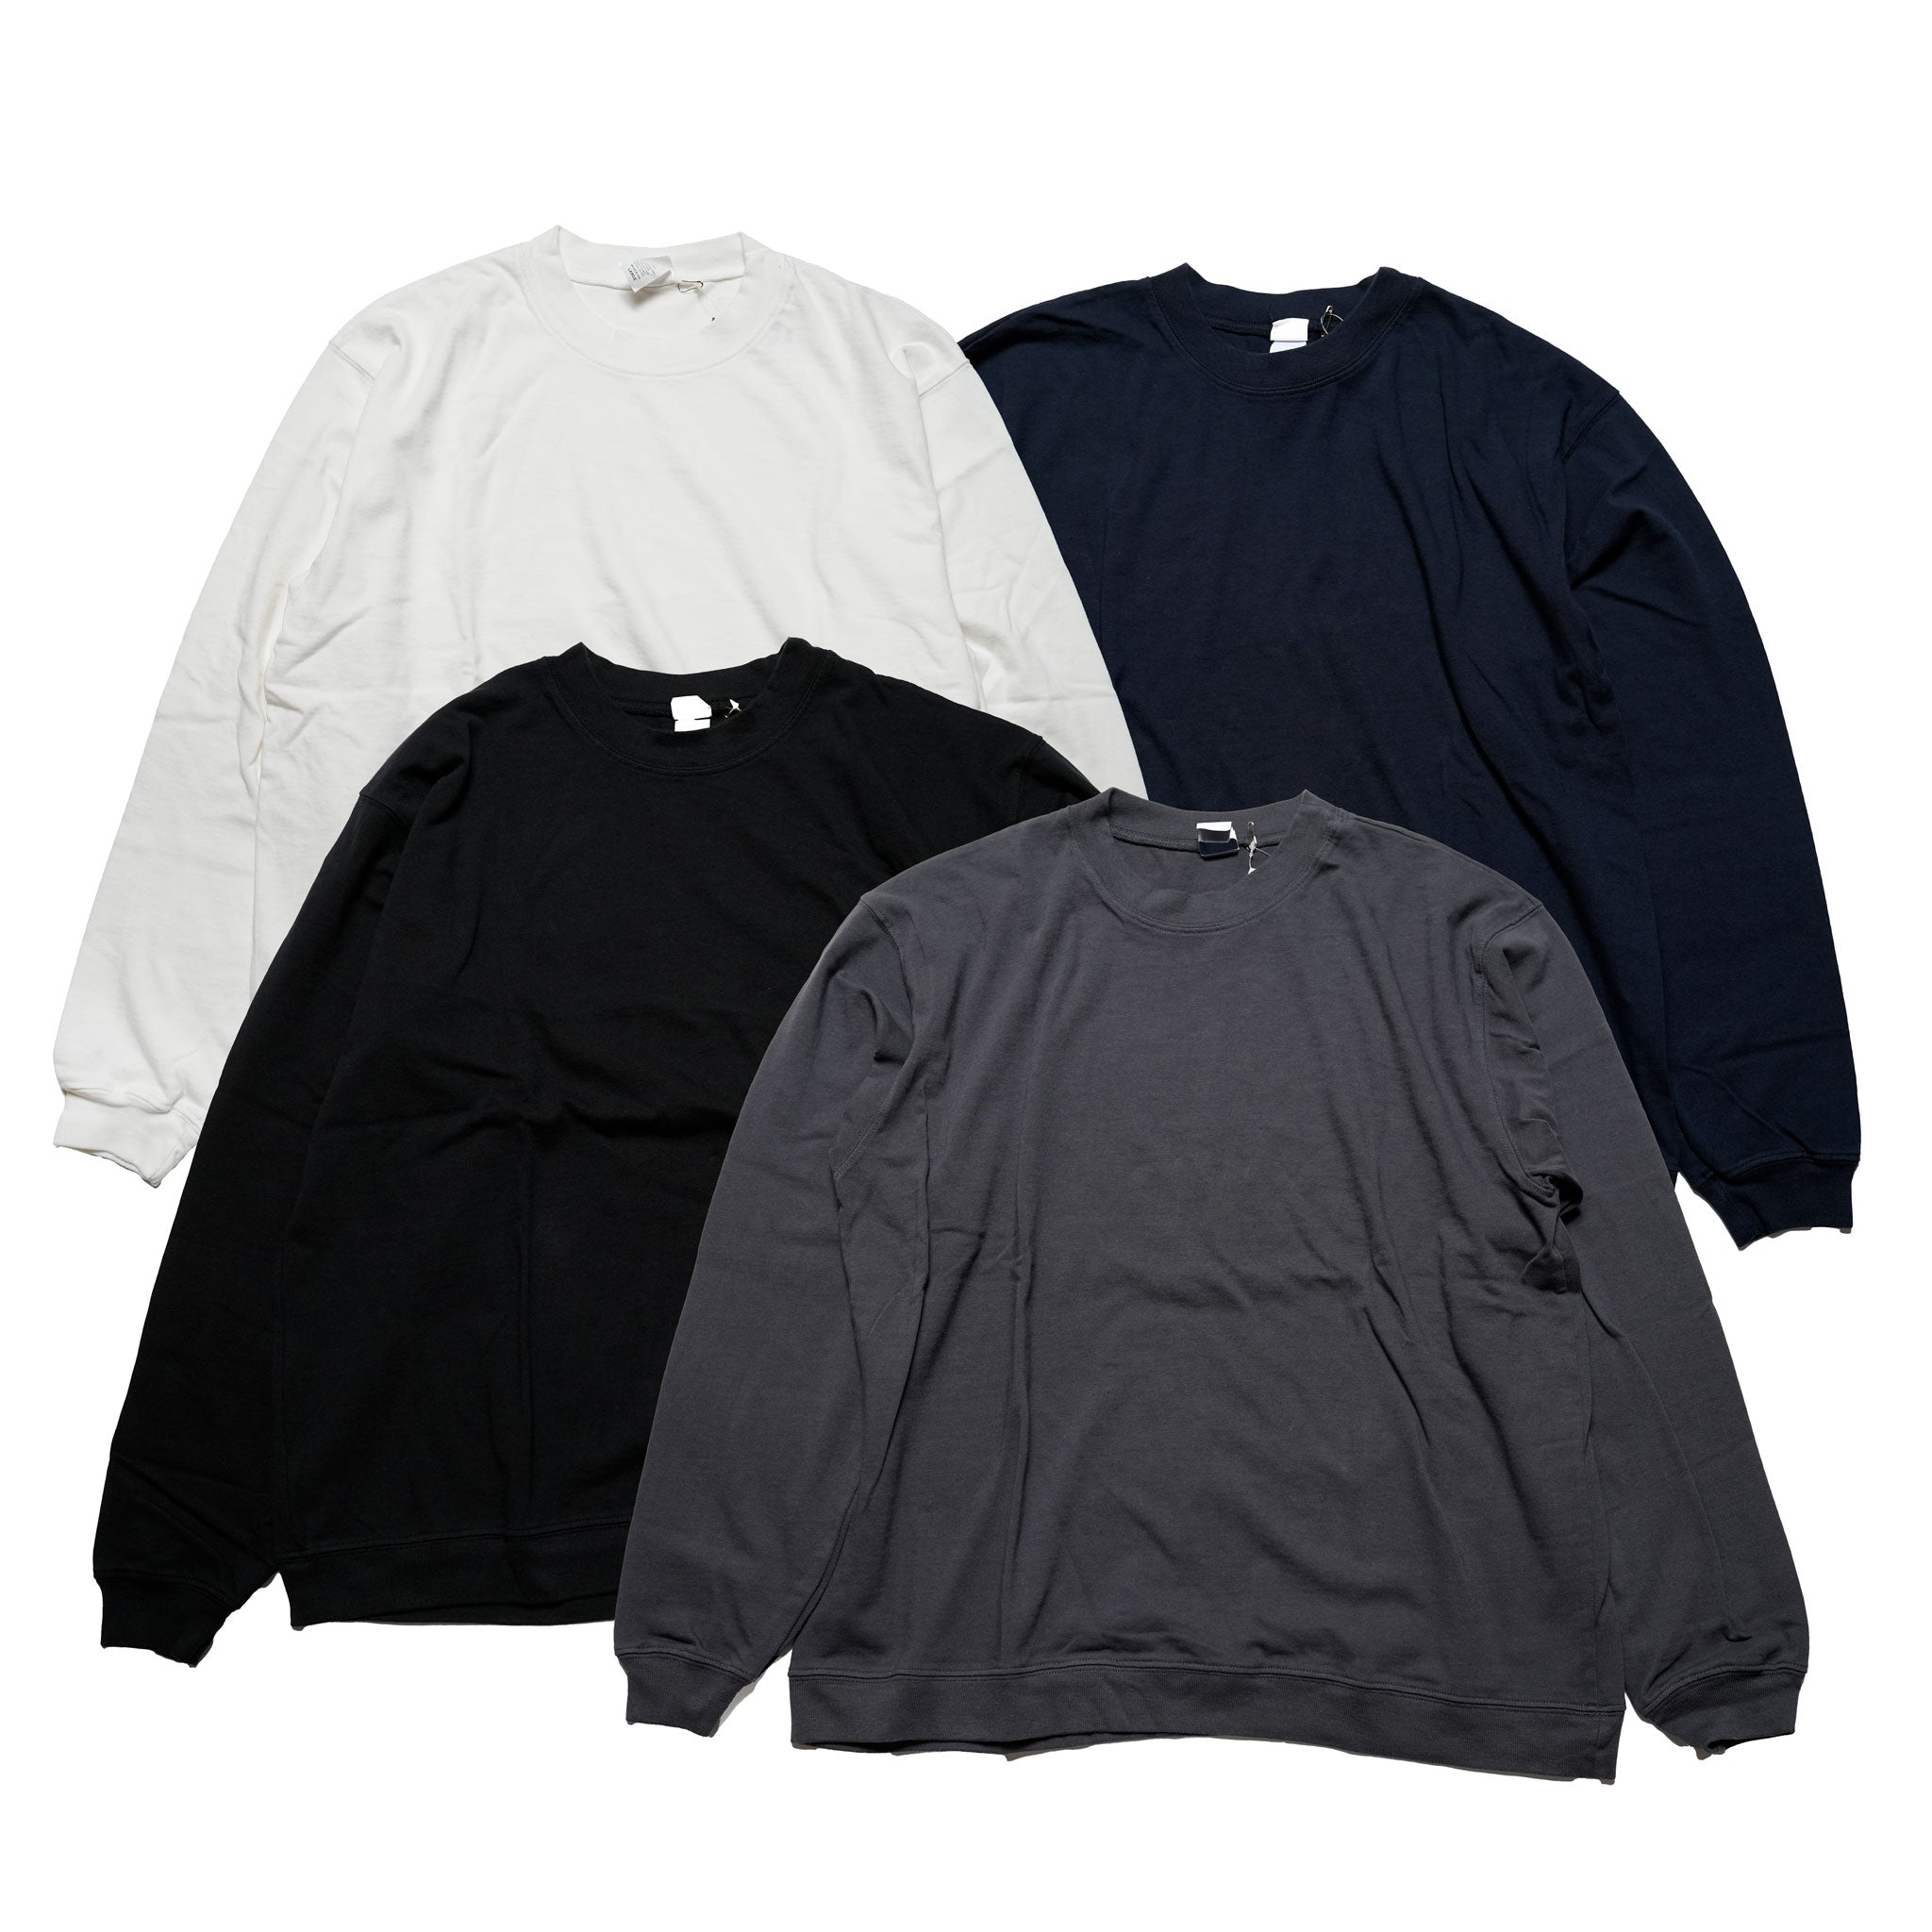 No:cstm02 | Name:Heavy Coton Sweat Shirts | Color:#White,#Black,#Navy,#Charcoal | Size:M/L/XL | 【SMOKE TONE×CAMBER】【SMOKE T ONE】【ONE CS FITS ALL】